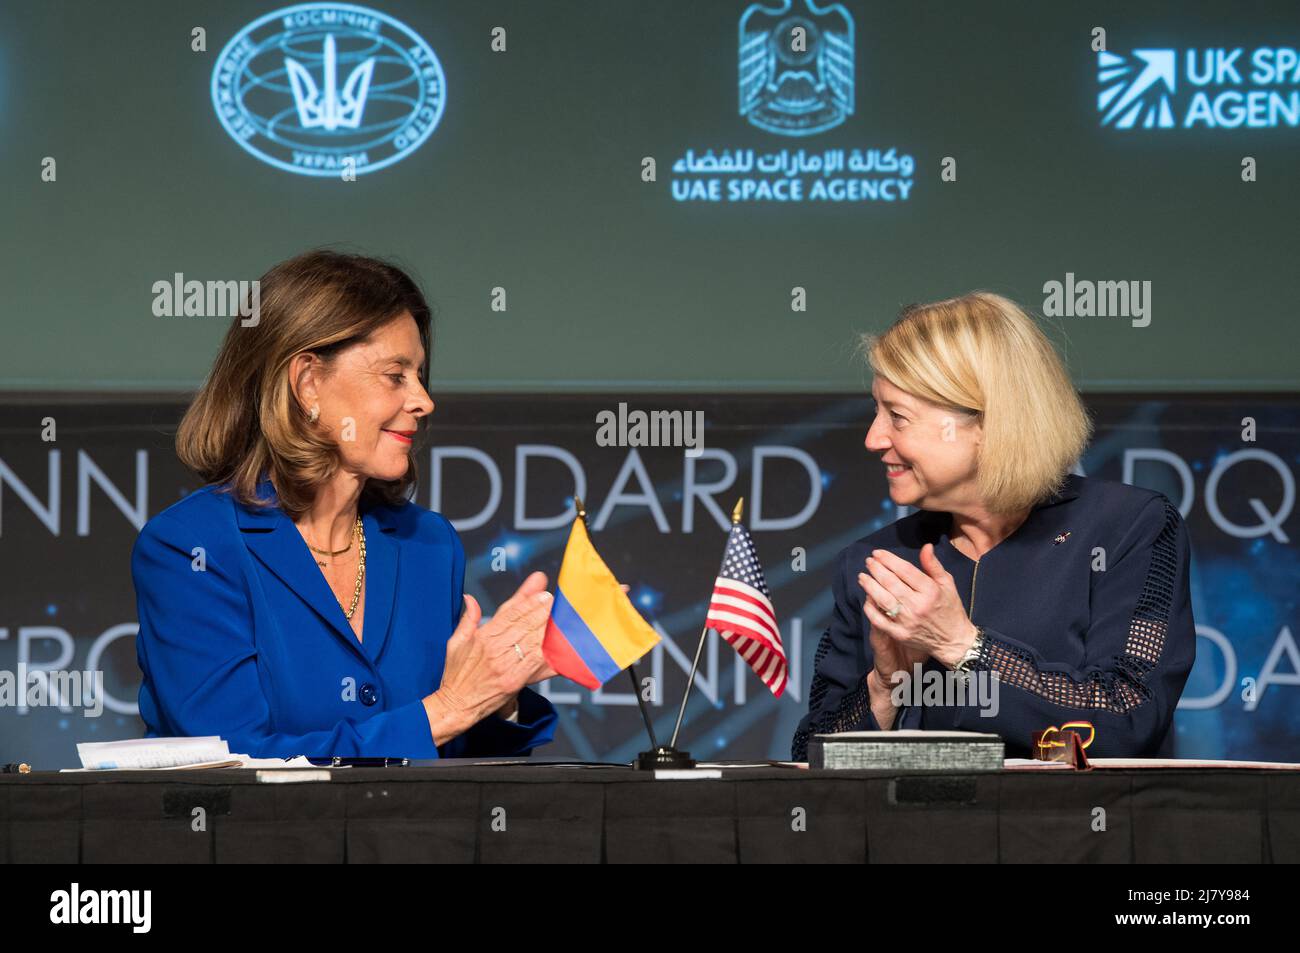 Washington, United States of America. 10 May, 2022. Colombian Vice President and Foreign Minister, Marta Lucia Ramirez, left, and NASA Deputy Administrator Pam Melroy, celebrate after the signing of the Artemis Accords, at the NASA Headquarters Mary W. Jackson Building, May 10, 2022 in Washington, DC, USA. Colombia is the nineteenth country to sign the Artemis Accords, which establish a practical set of principles to guide space exploration cooperation among nations participating in the NASA Artemis program. Credit: Aubrey Gemignani/NASA/Alamy Live News Stock Photo